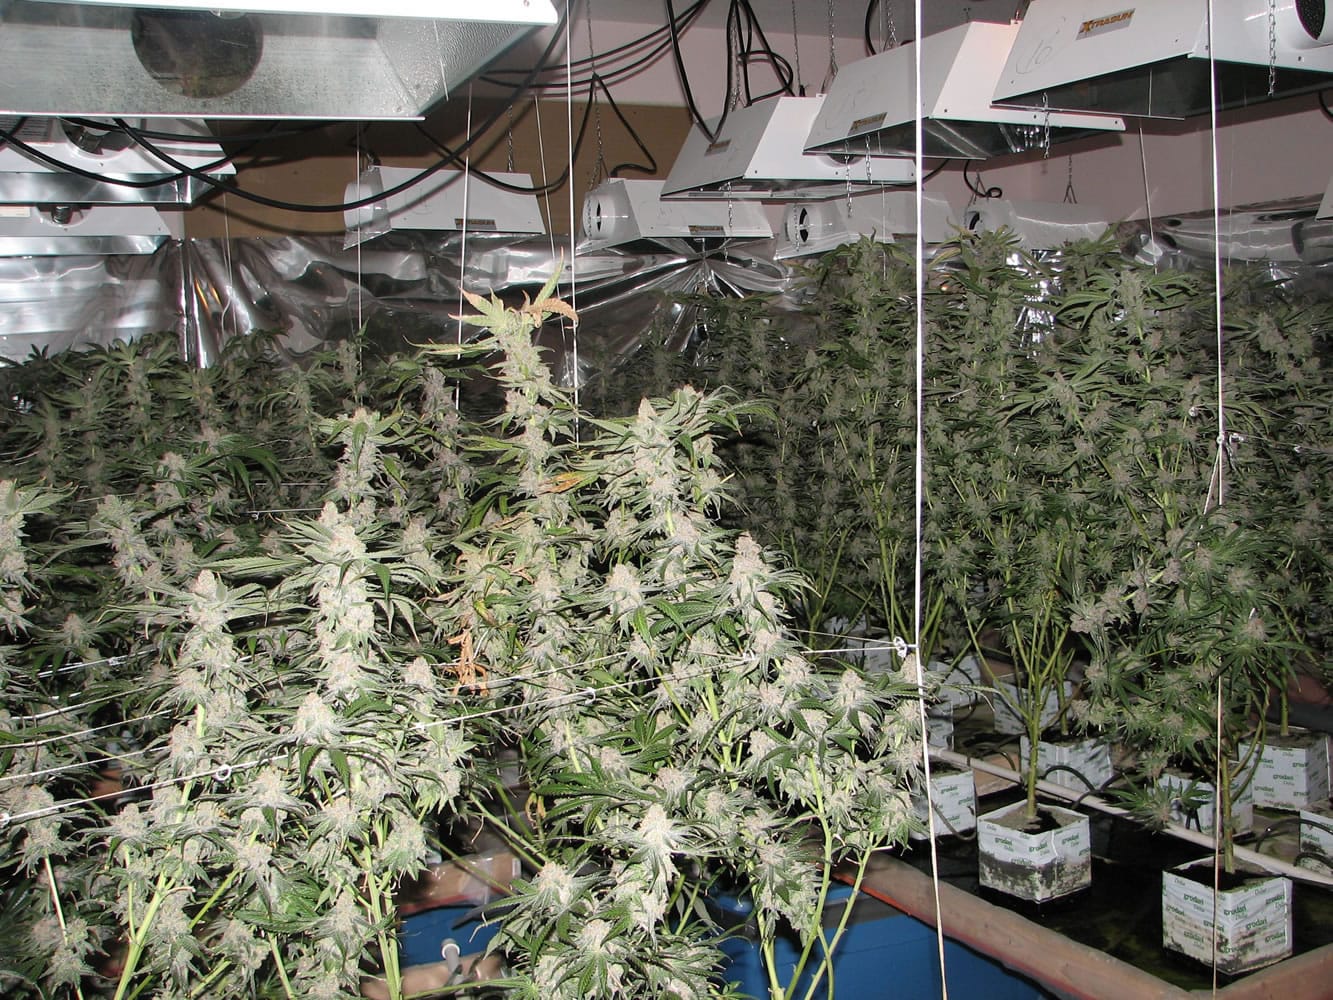 Deputies in Skamania County seized marijuana plants and growing equipment from a residence in which seven rooms were filled with plants.